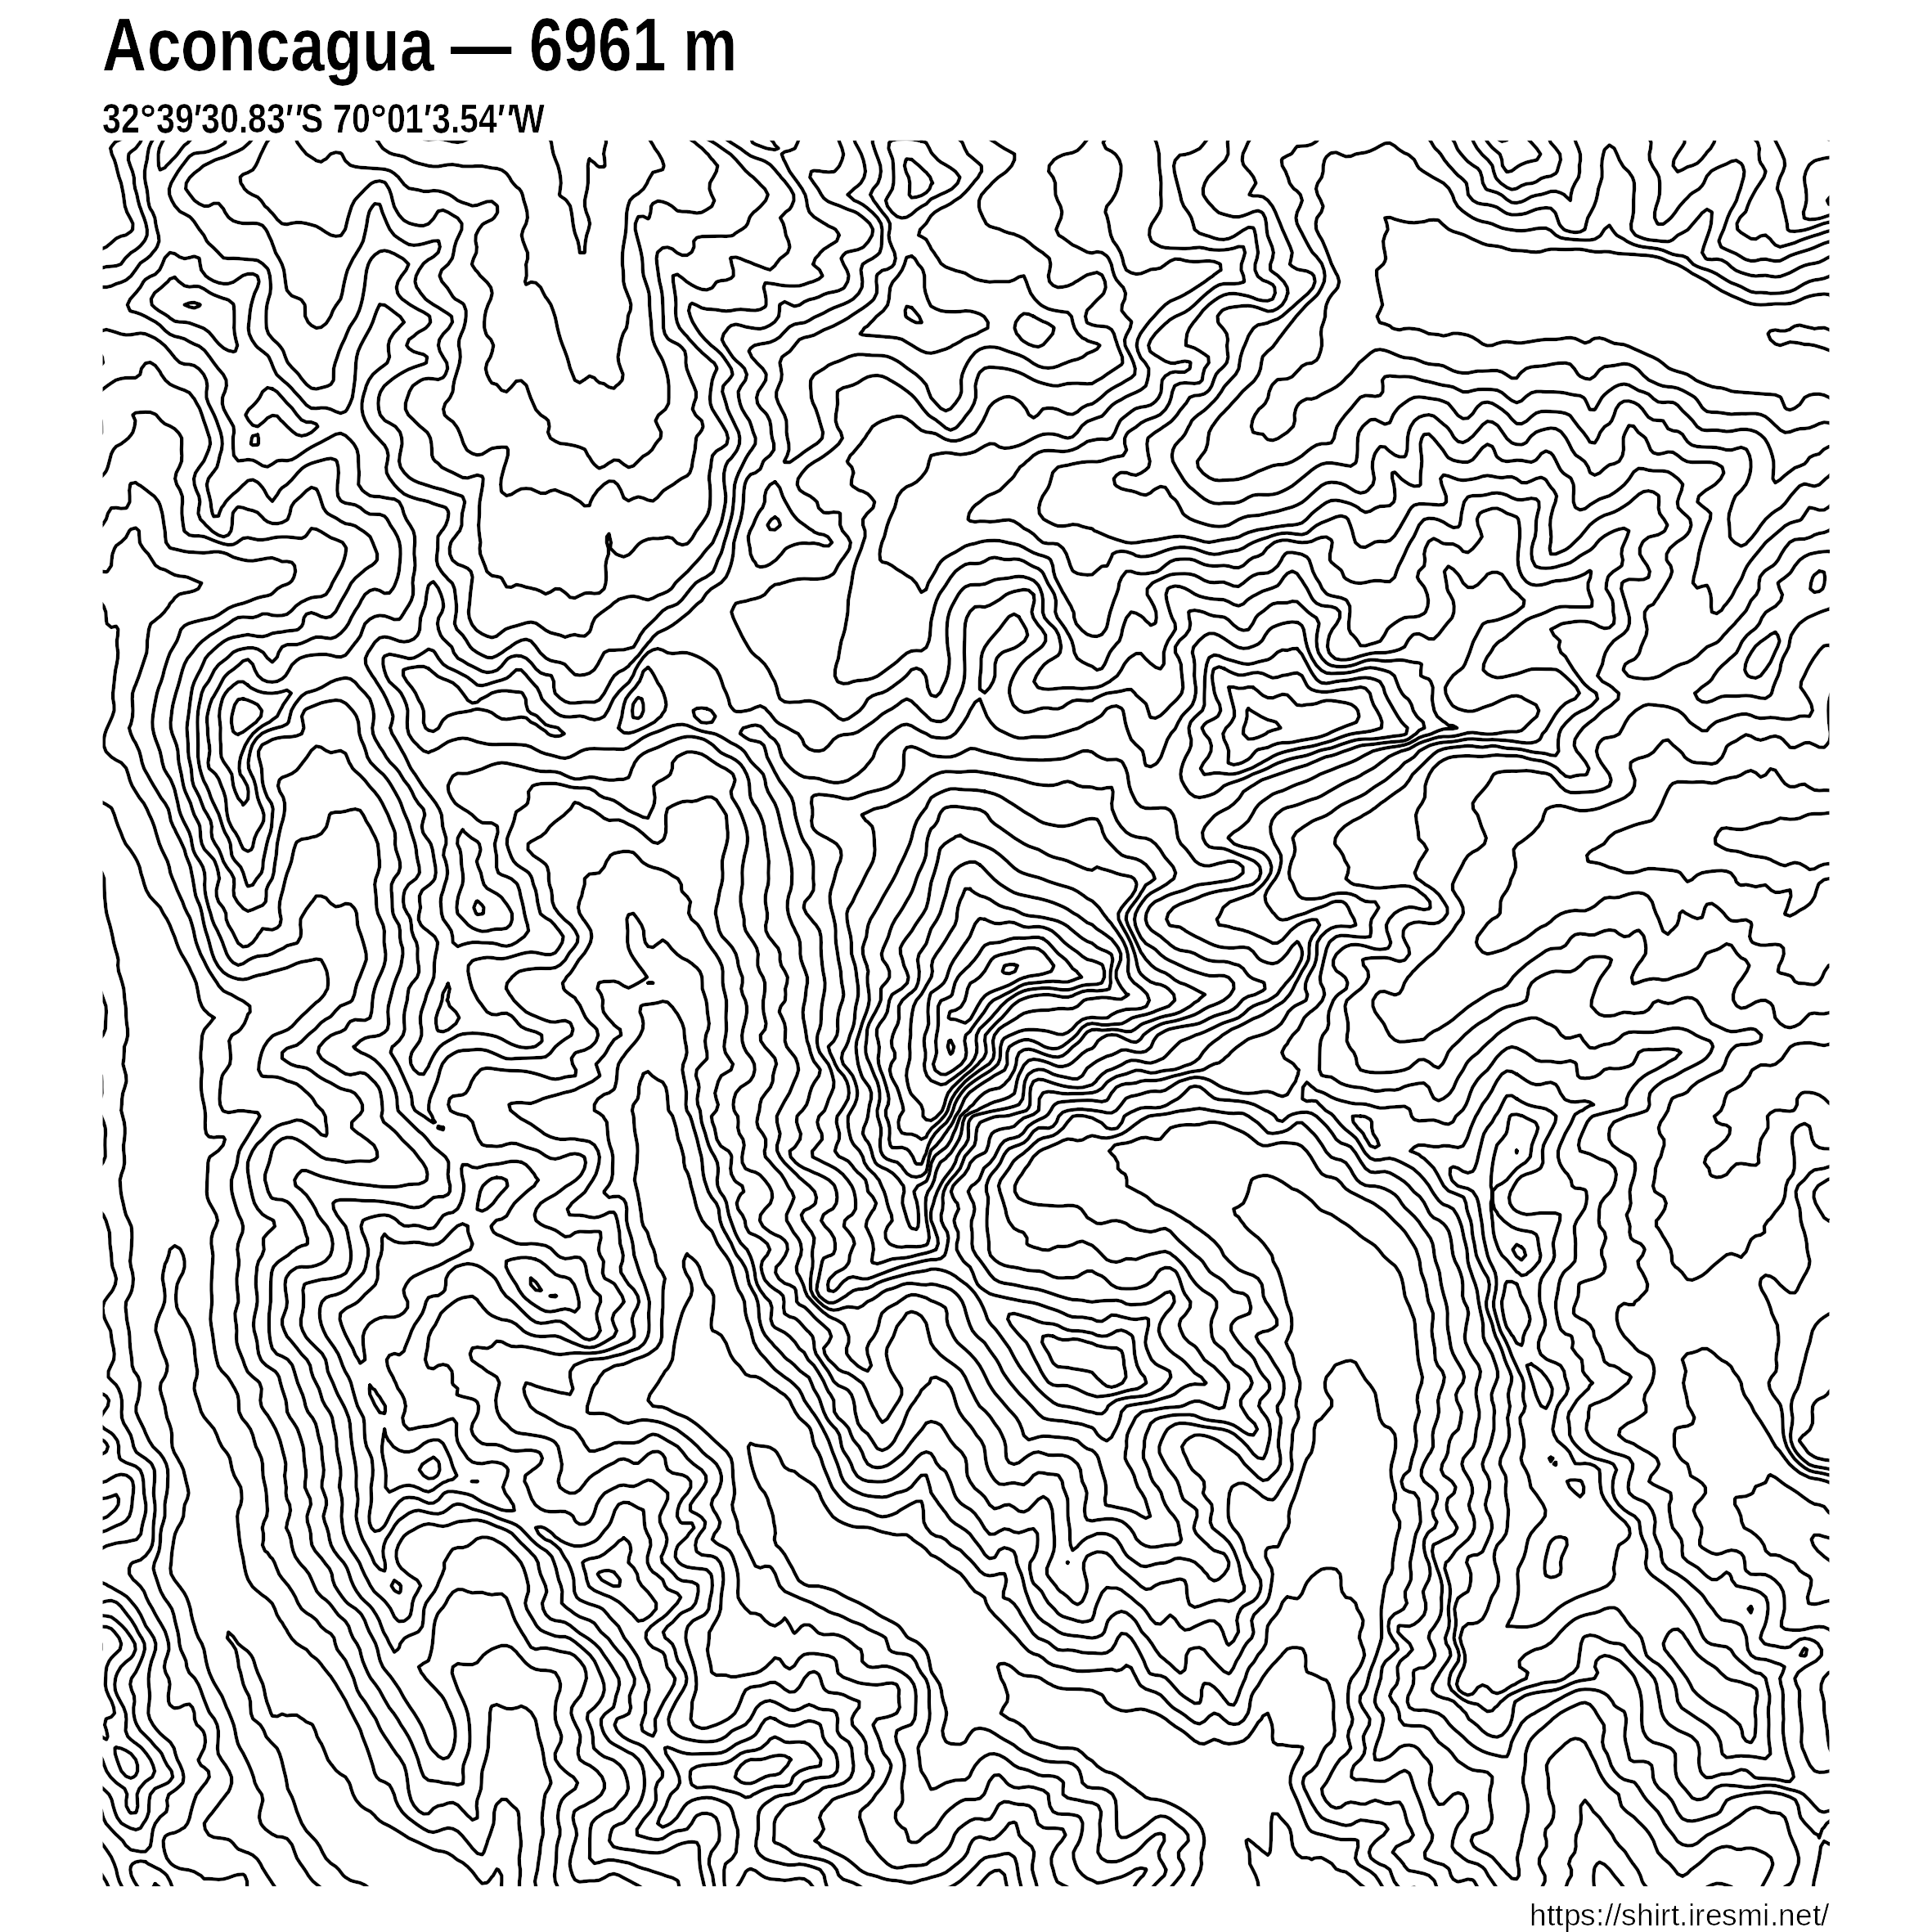 A map of the Aconcagua mountain consisting of isohypses